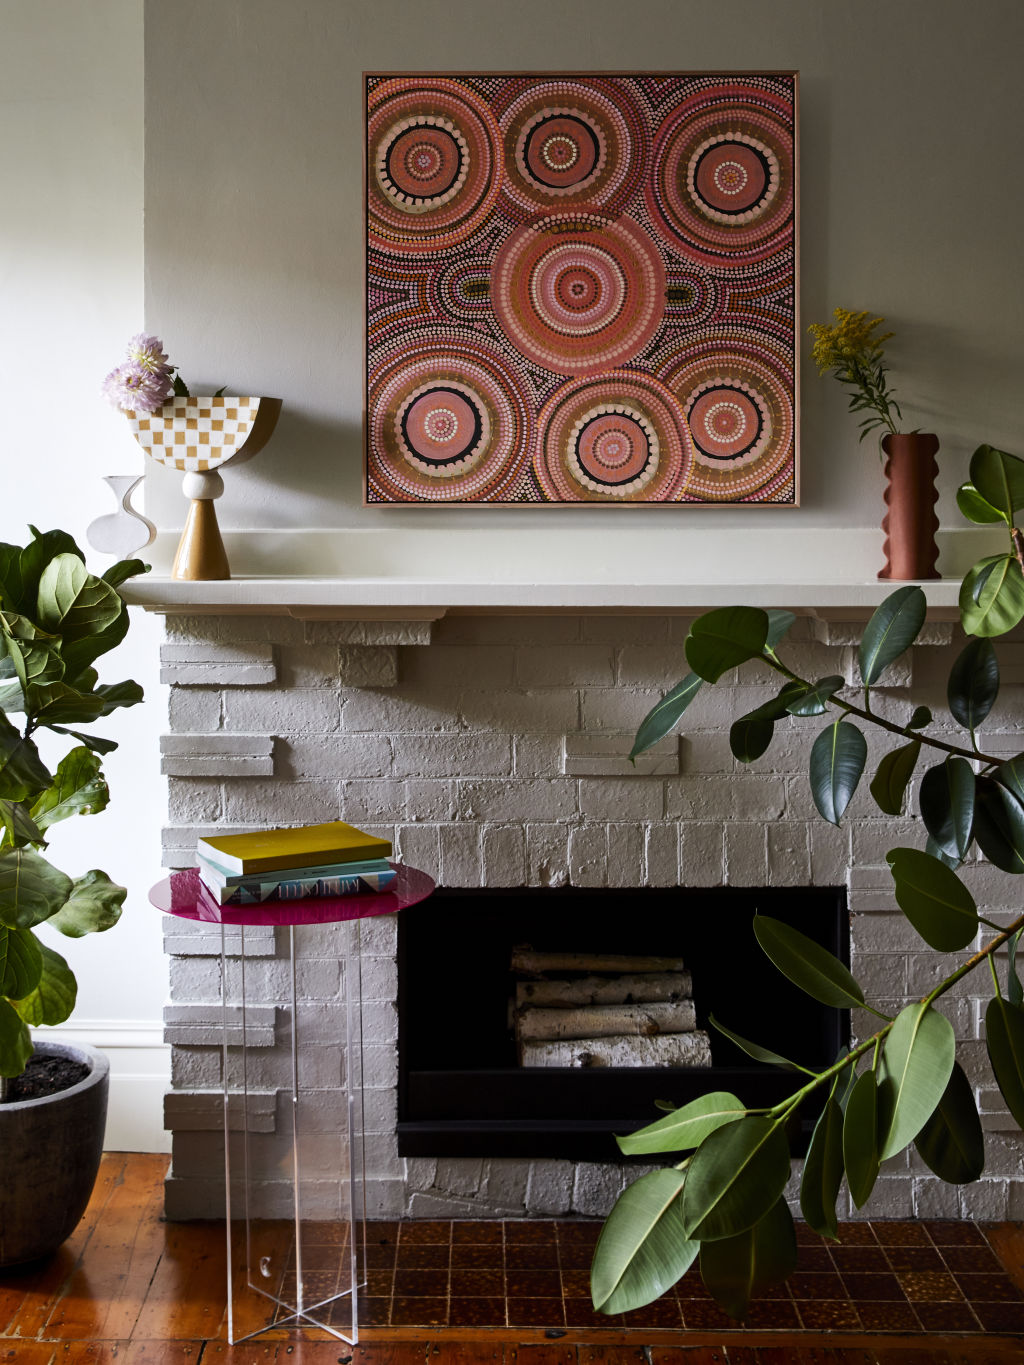 Work by Lou Martin, styling by Julia Green for Greenhouse Interiors. Photo: Armelle Habib.